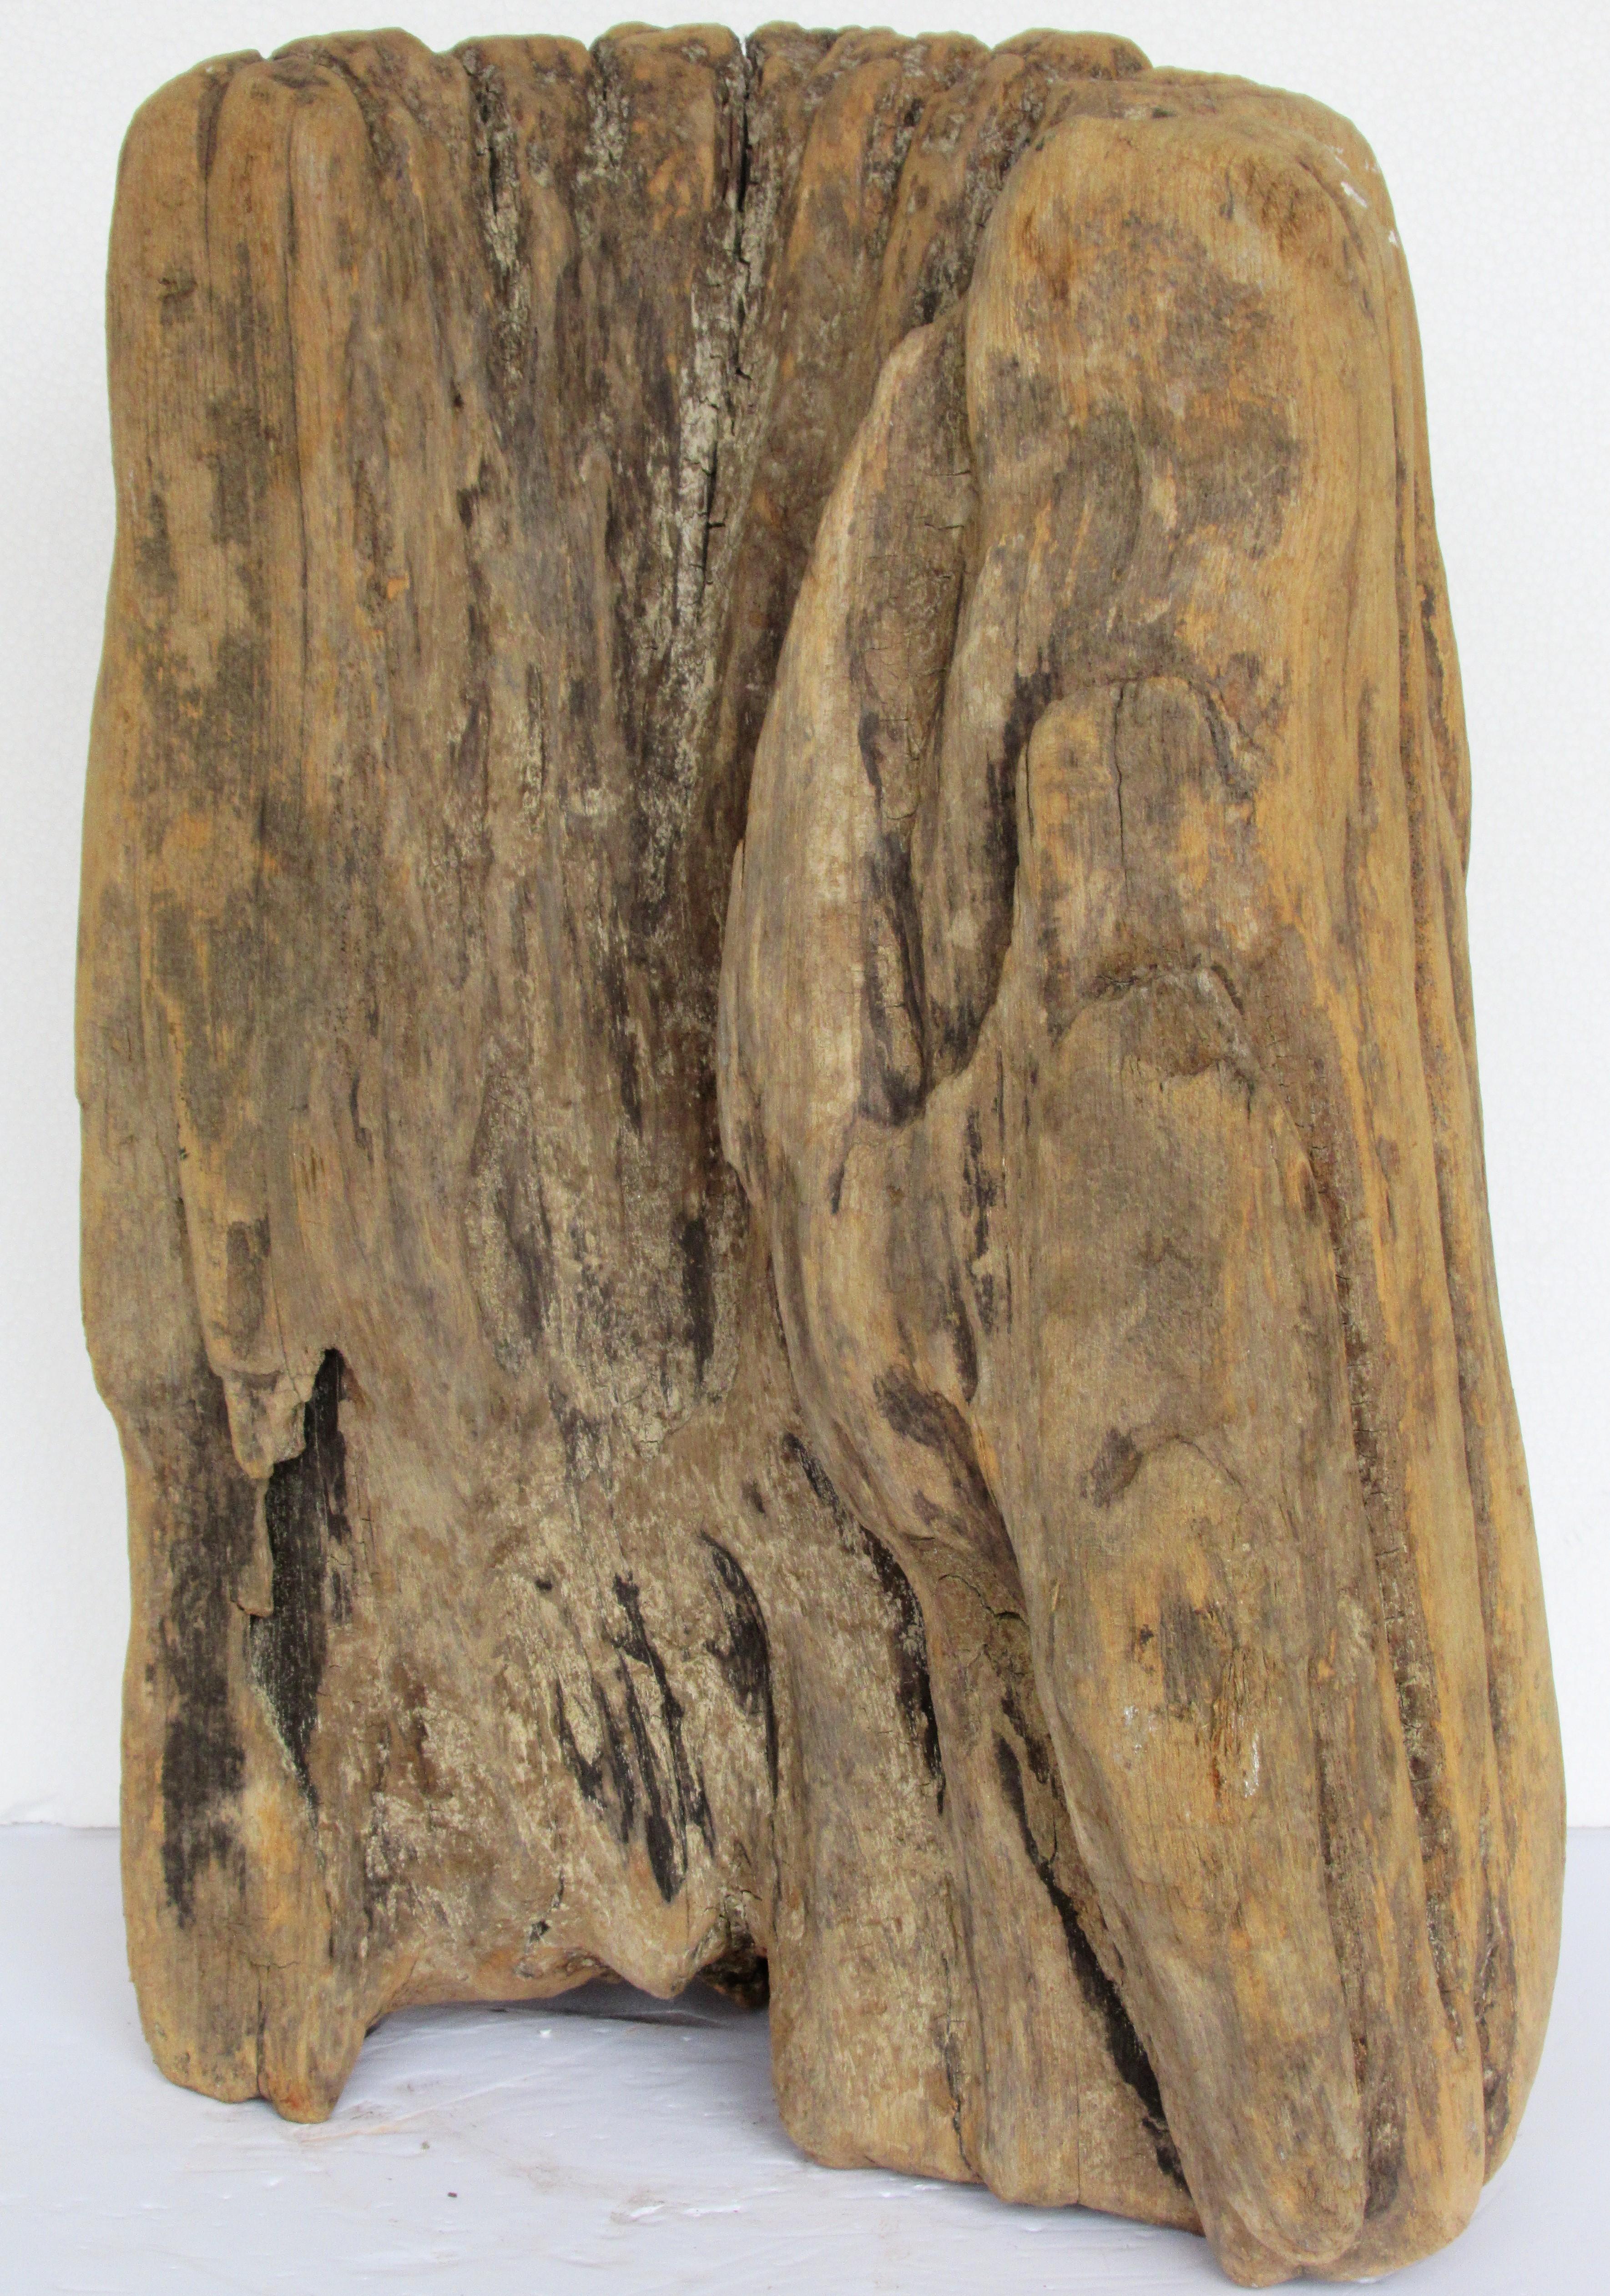 Organic Modern   Old Tree Trunk Sculpture Object For Sale